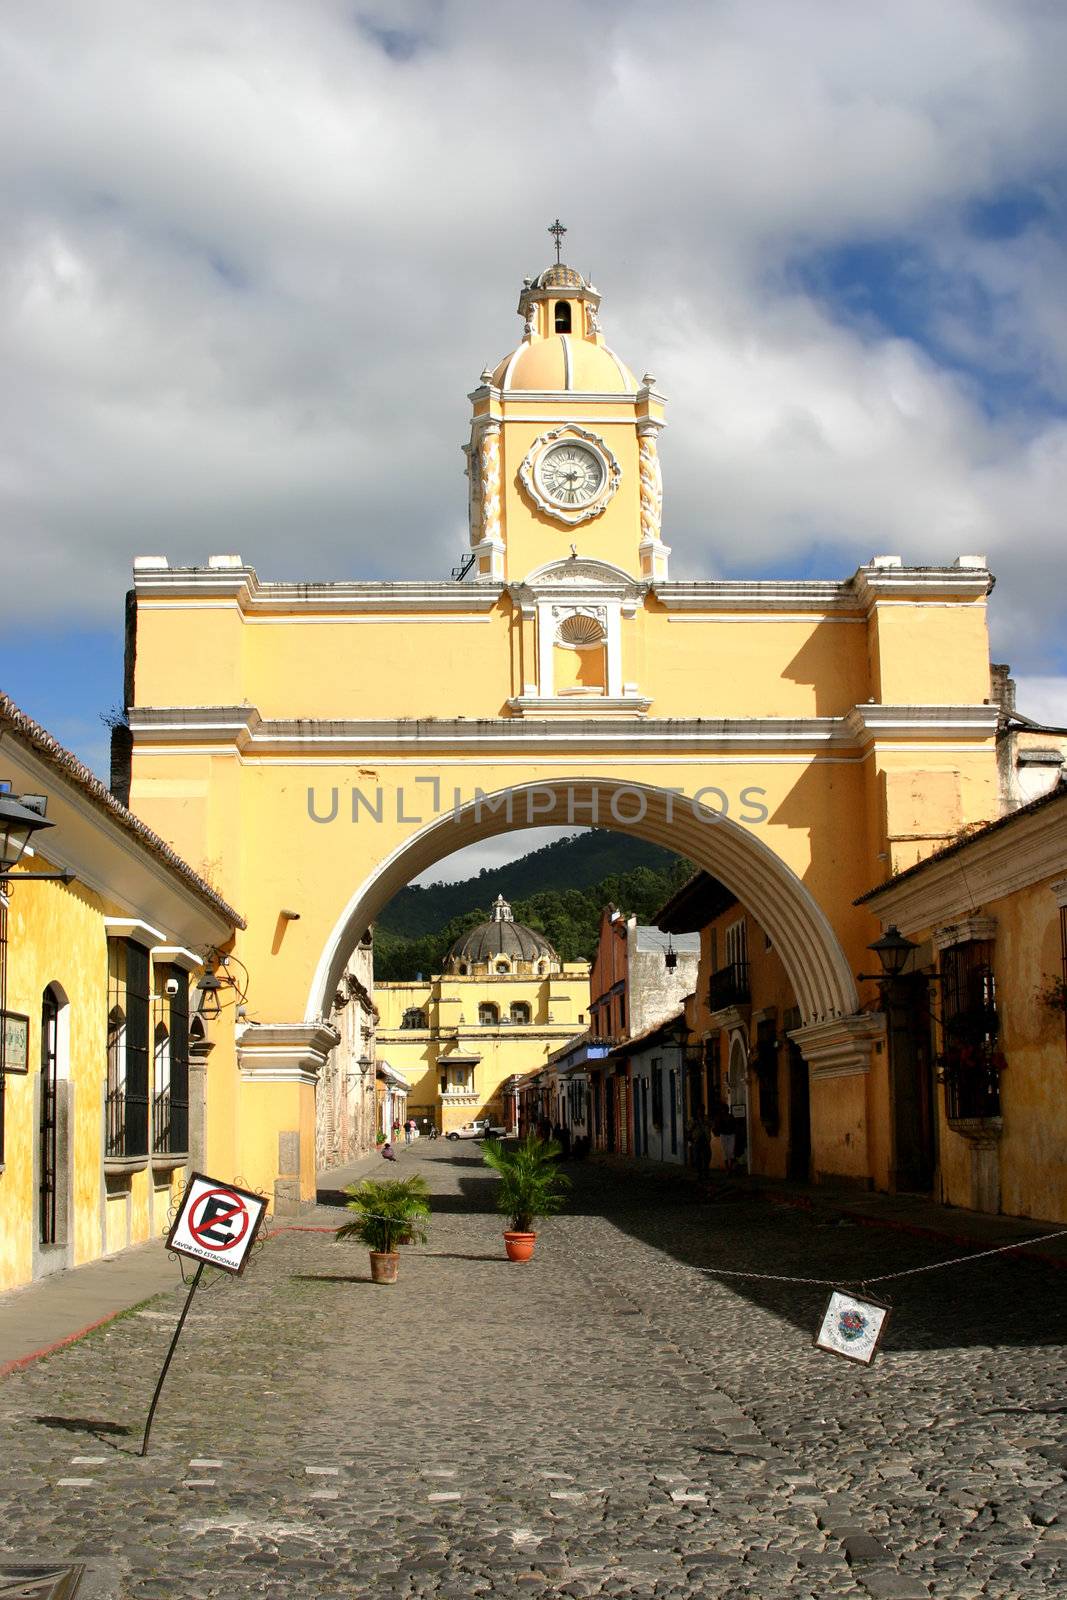 Old arch in historic colonial city of Guatemala